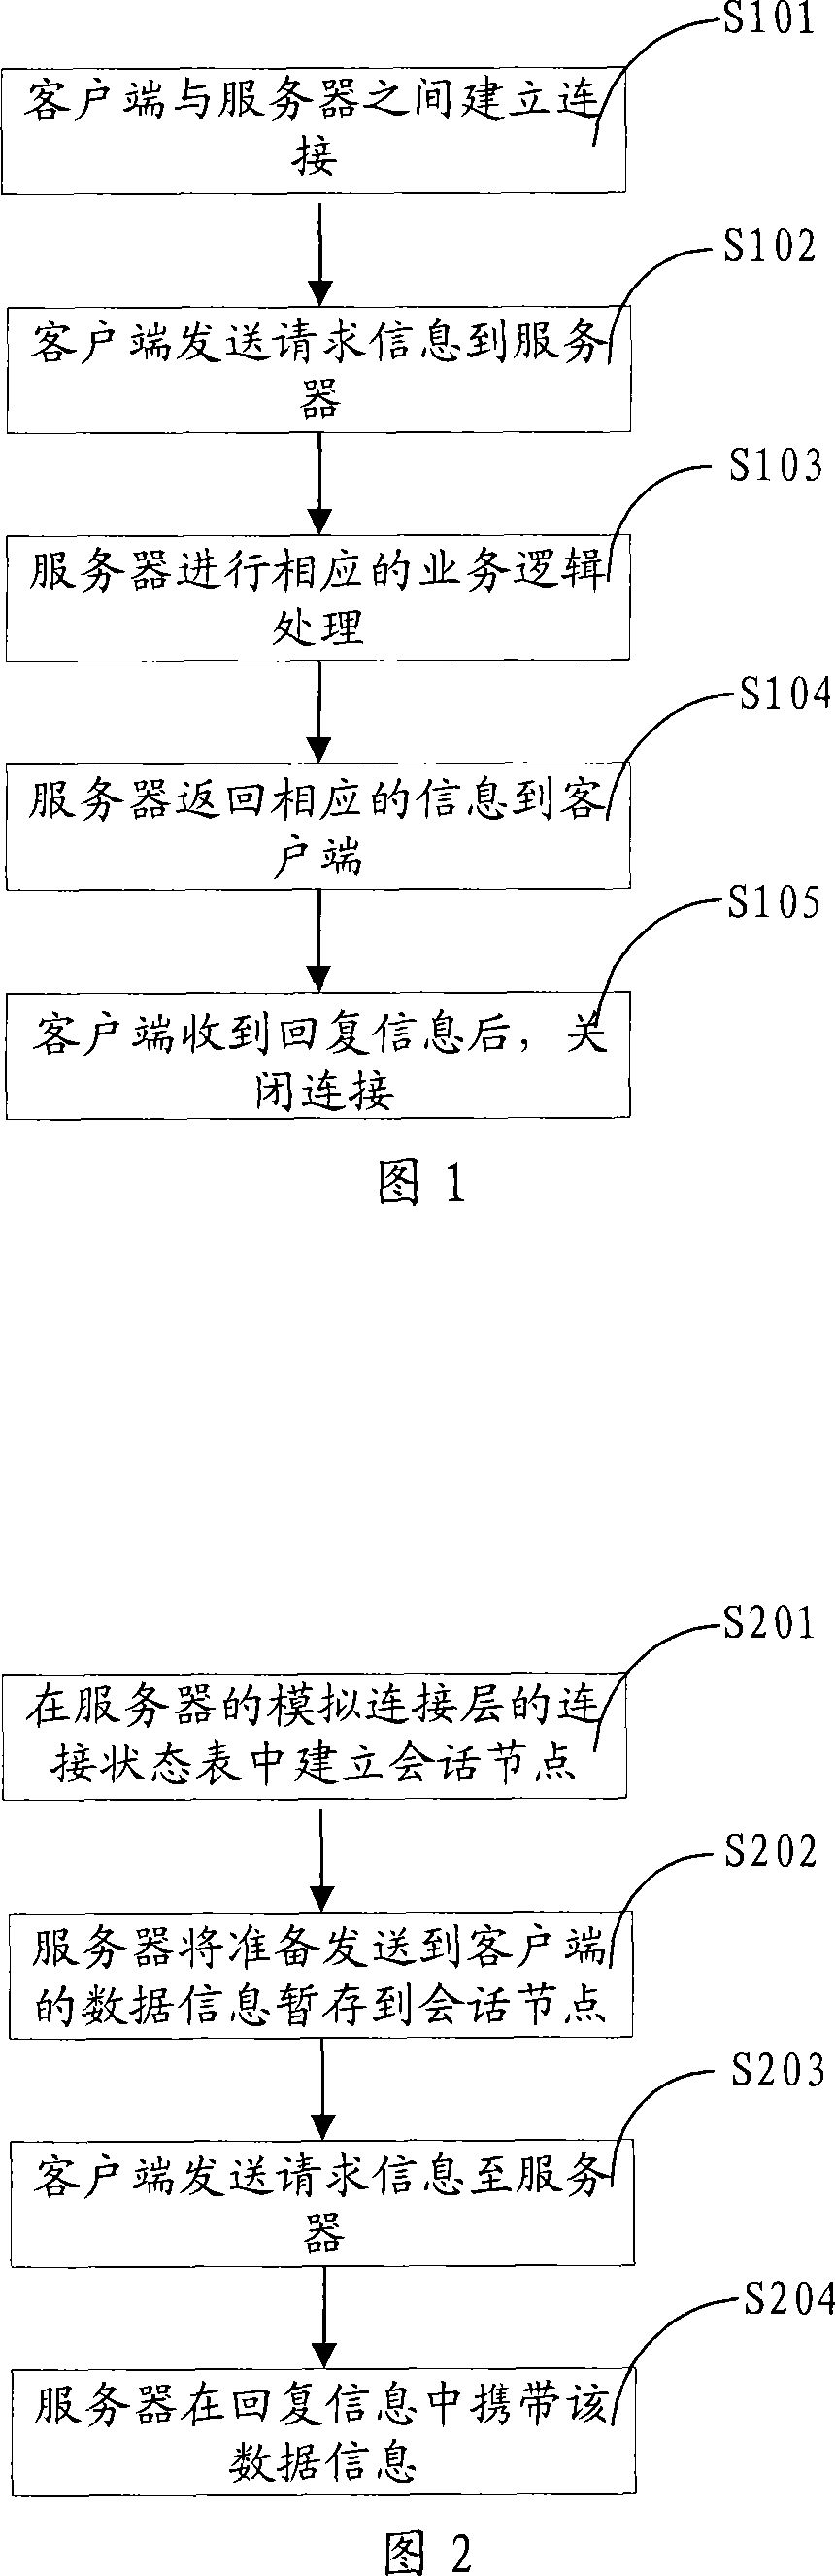 Method and system for stimulating stateful connection based on stateless network protocol